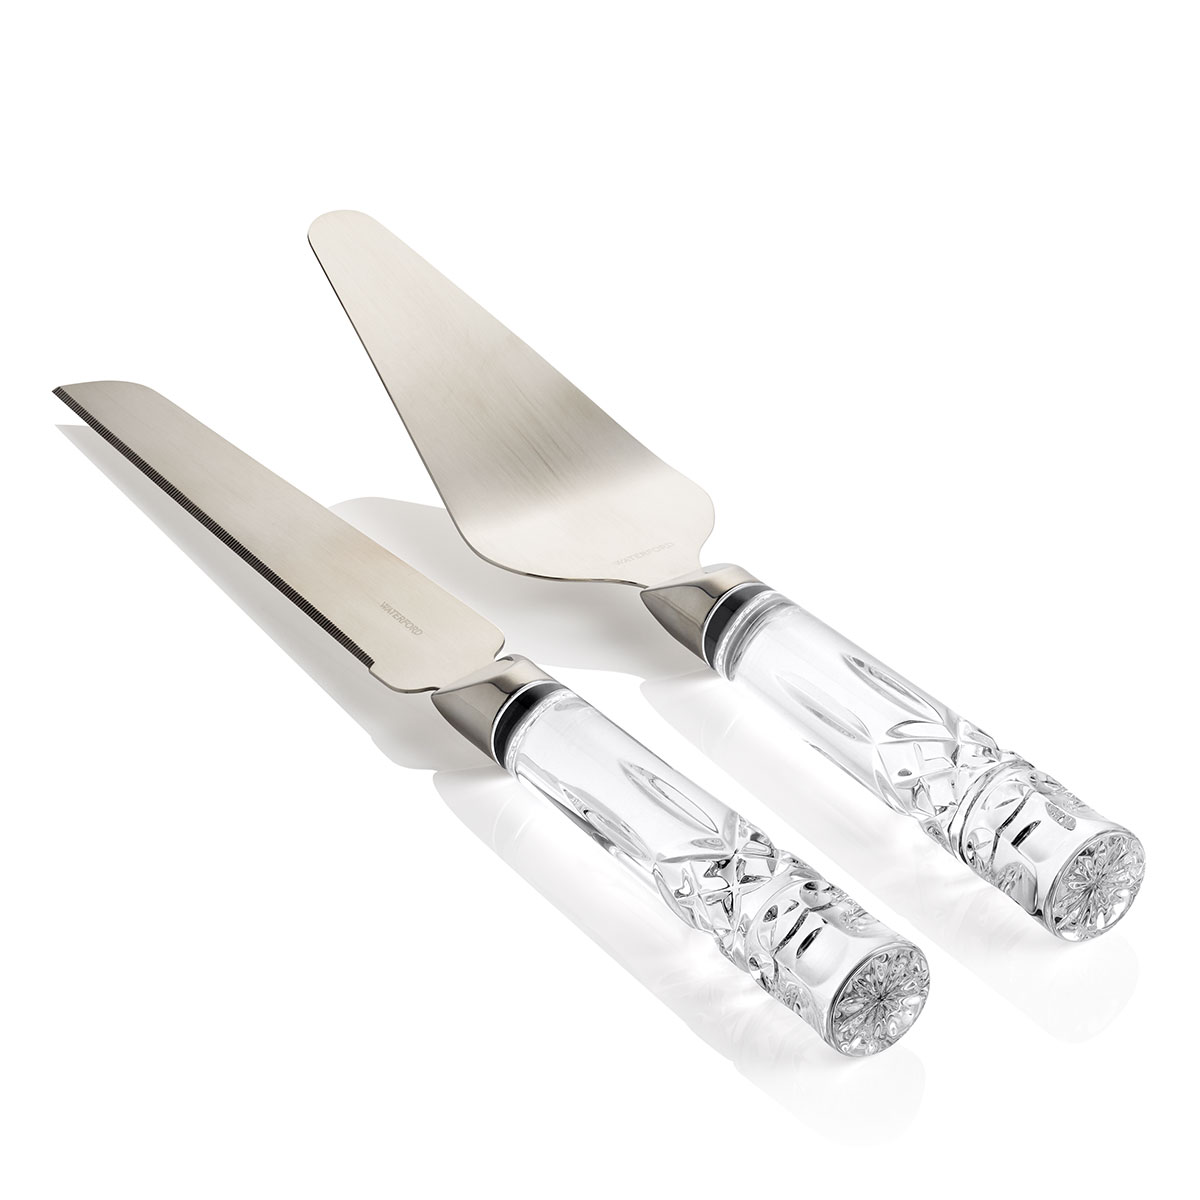 Waterford Lismore Cake Knife and Server Set